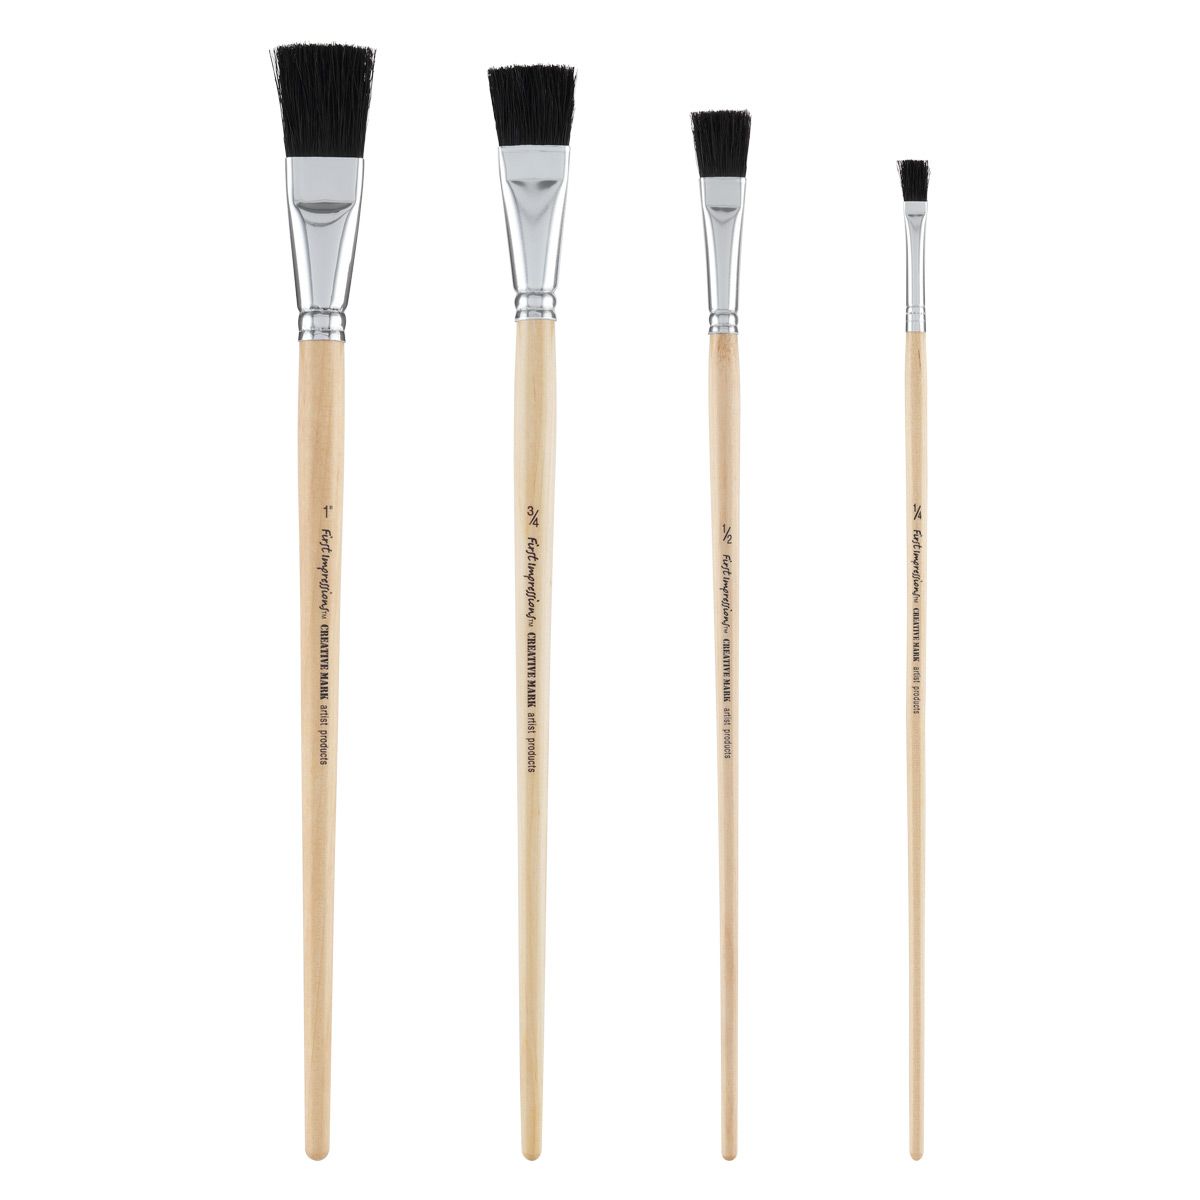 First Impressions Black Bristle Brushes - Long Handle